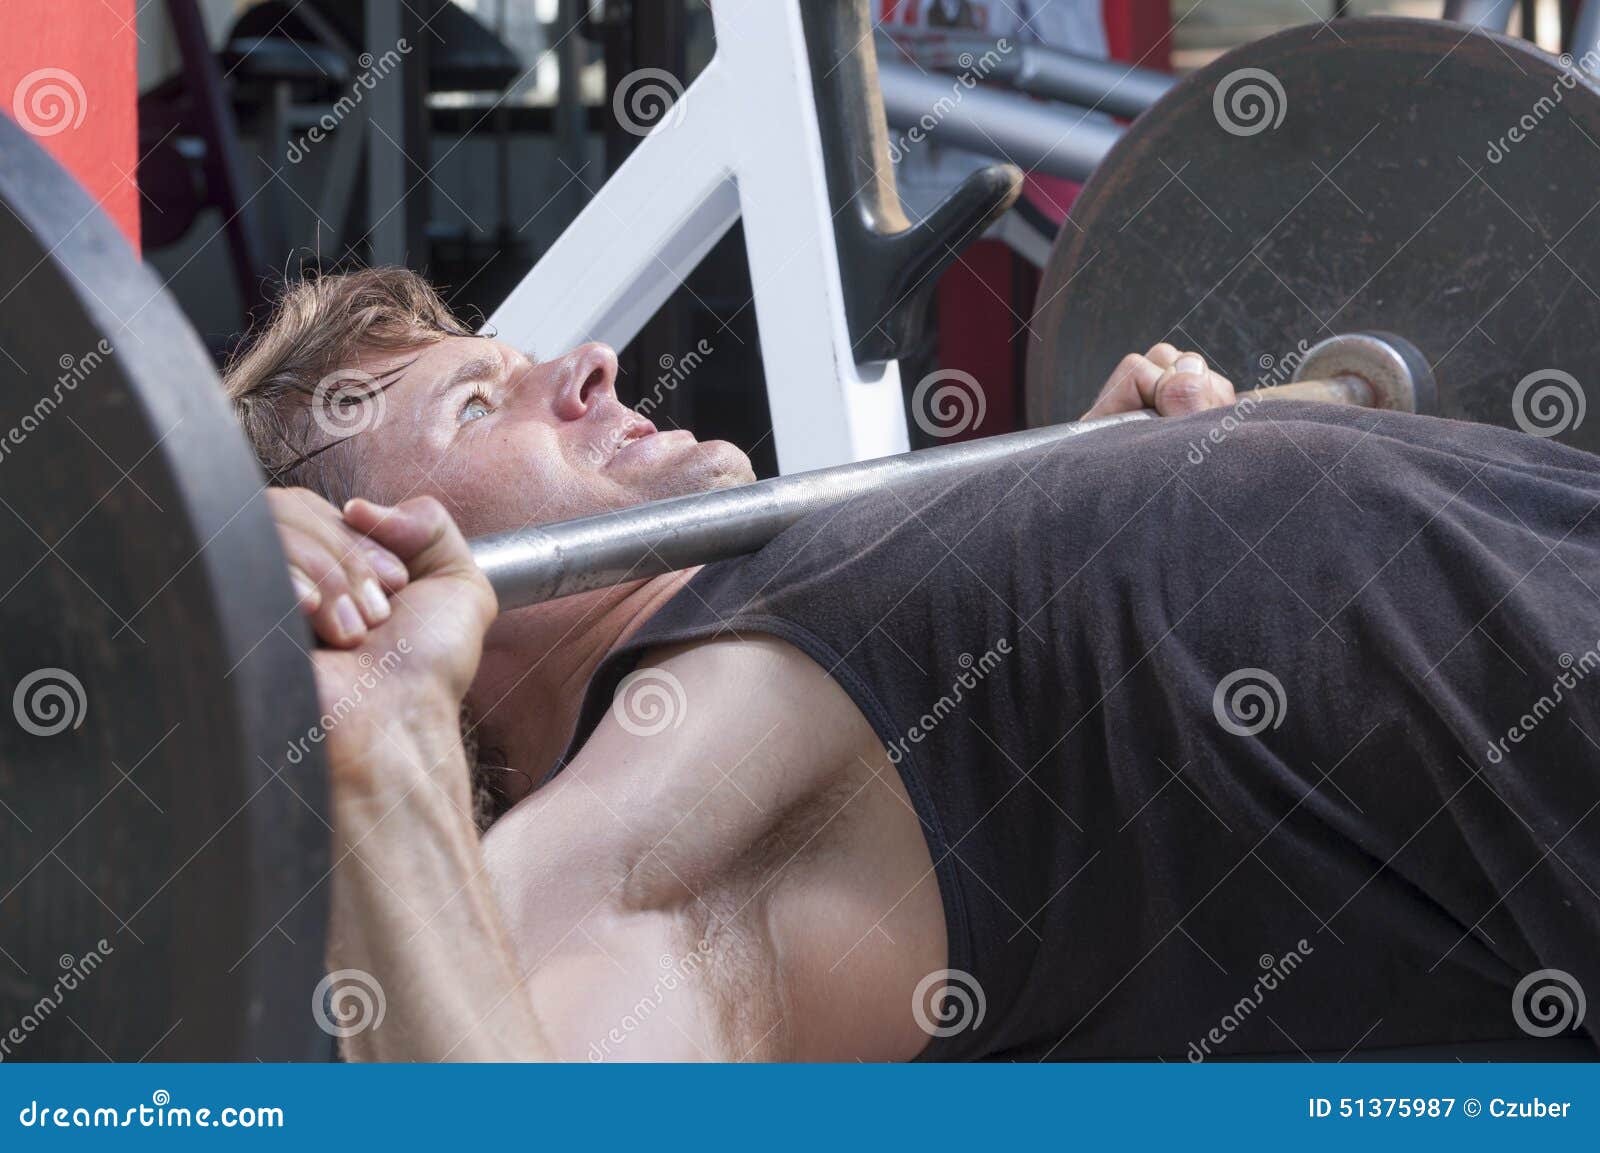 Heavy bench press stock image. Image of male, white, bench - 51375987